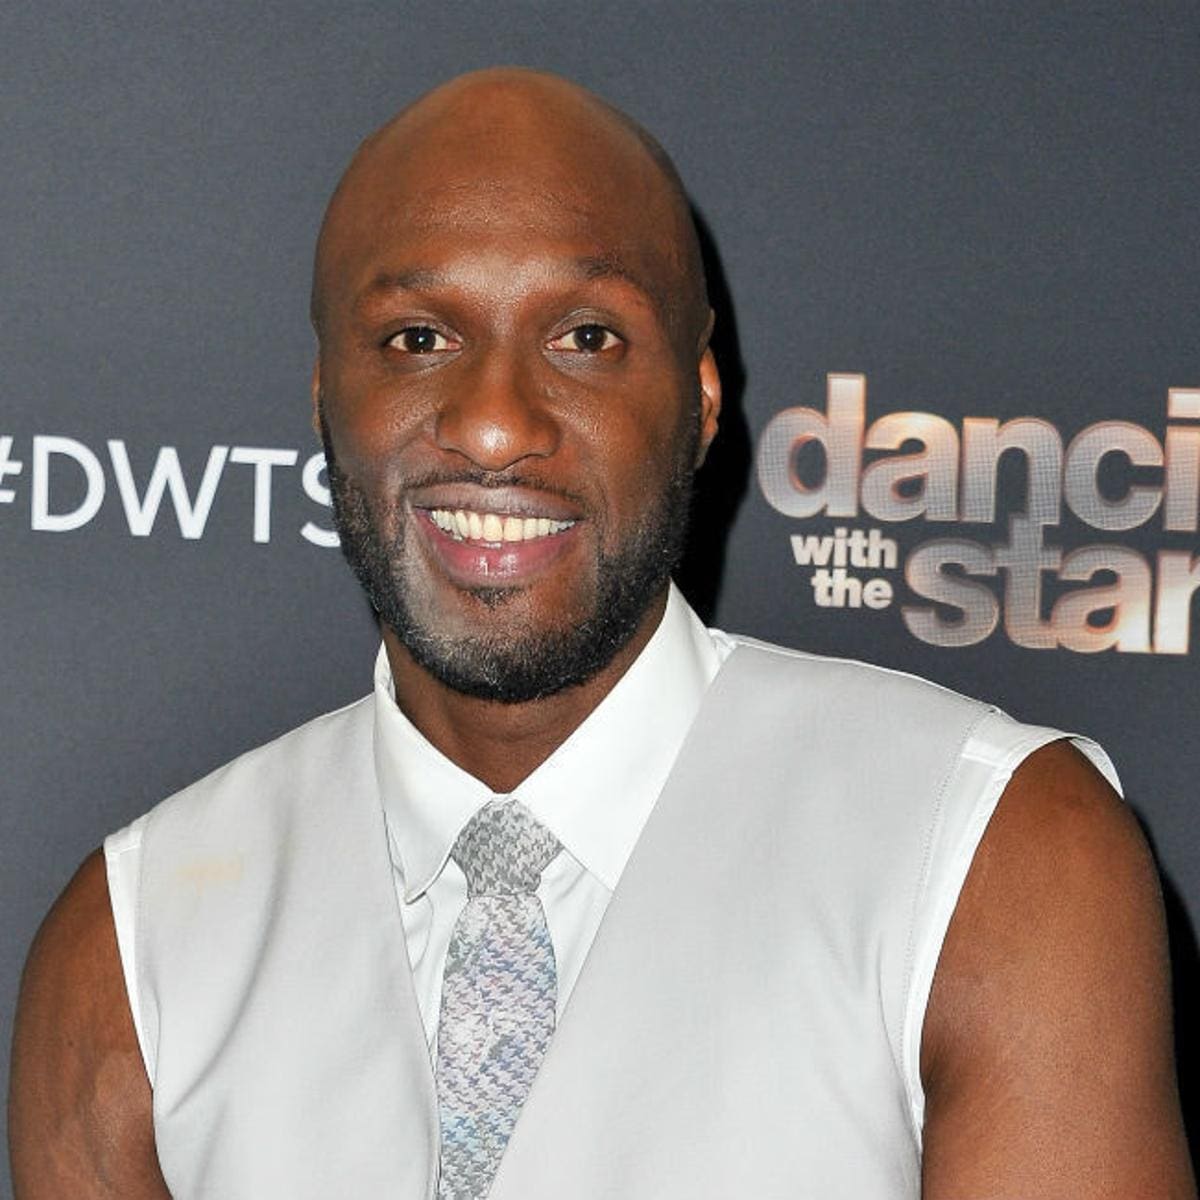 lamar-odom-has-to-pay-his-ex-lisa-morales-almost-400k-in-child-support